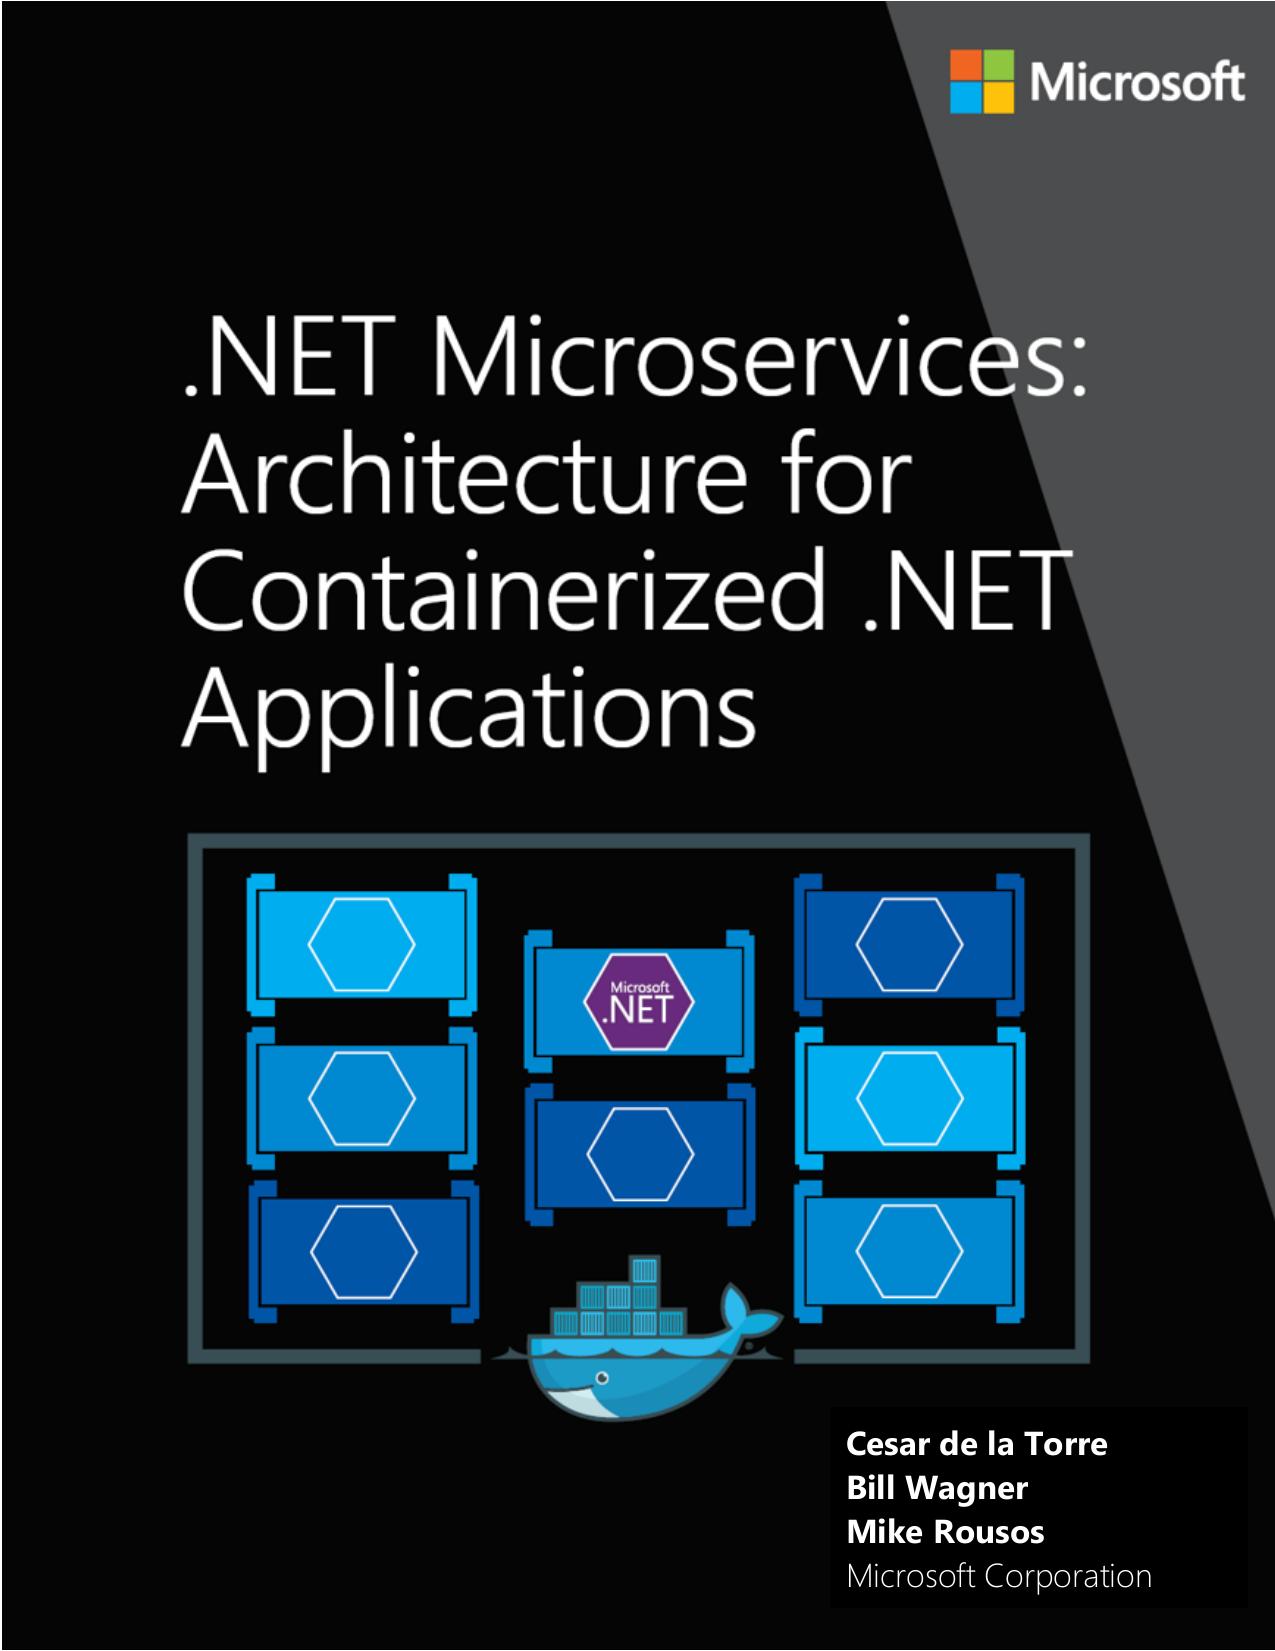 NET Microservices Architecture for Containerized .NET Applications - Version 1